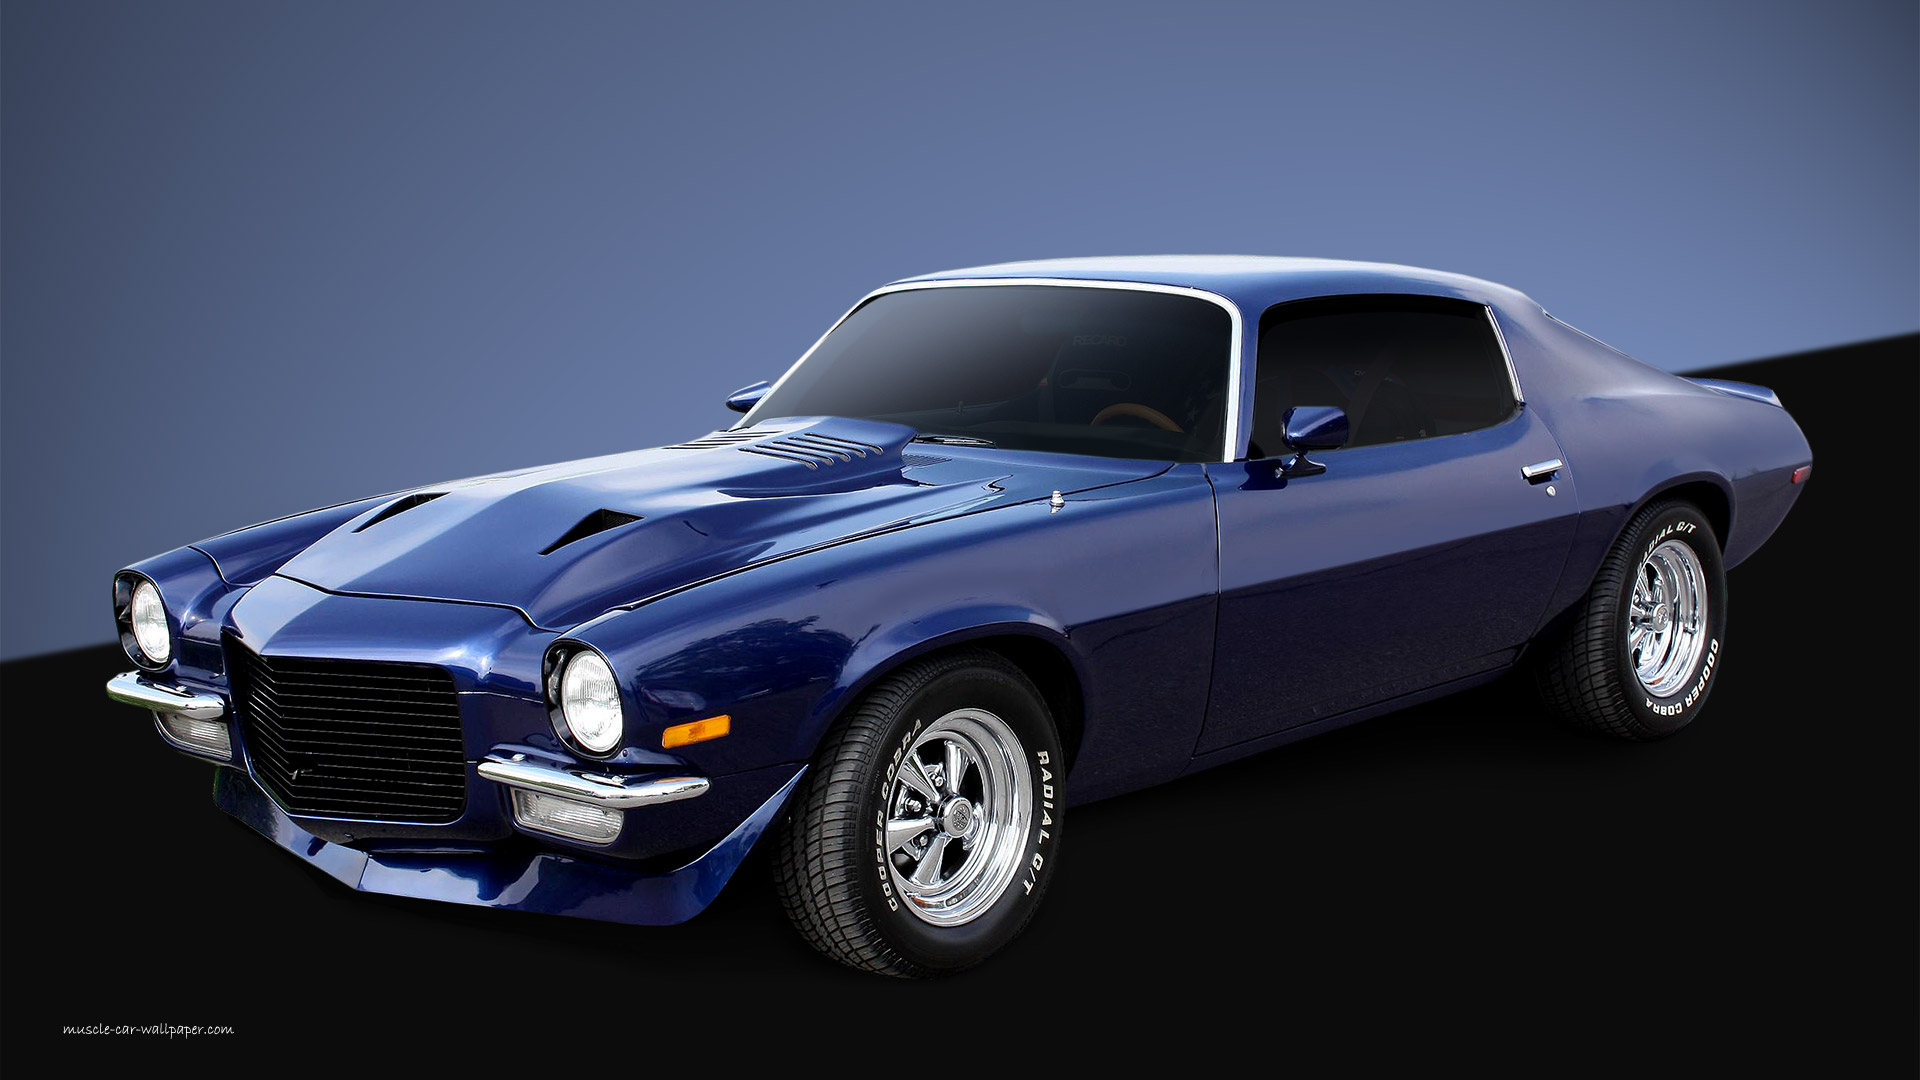 Custom Camaro Muscle Car HD Wallpaper For Your Desktop Background Or